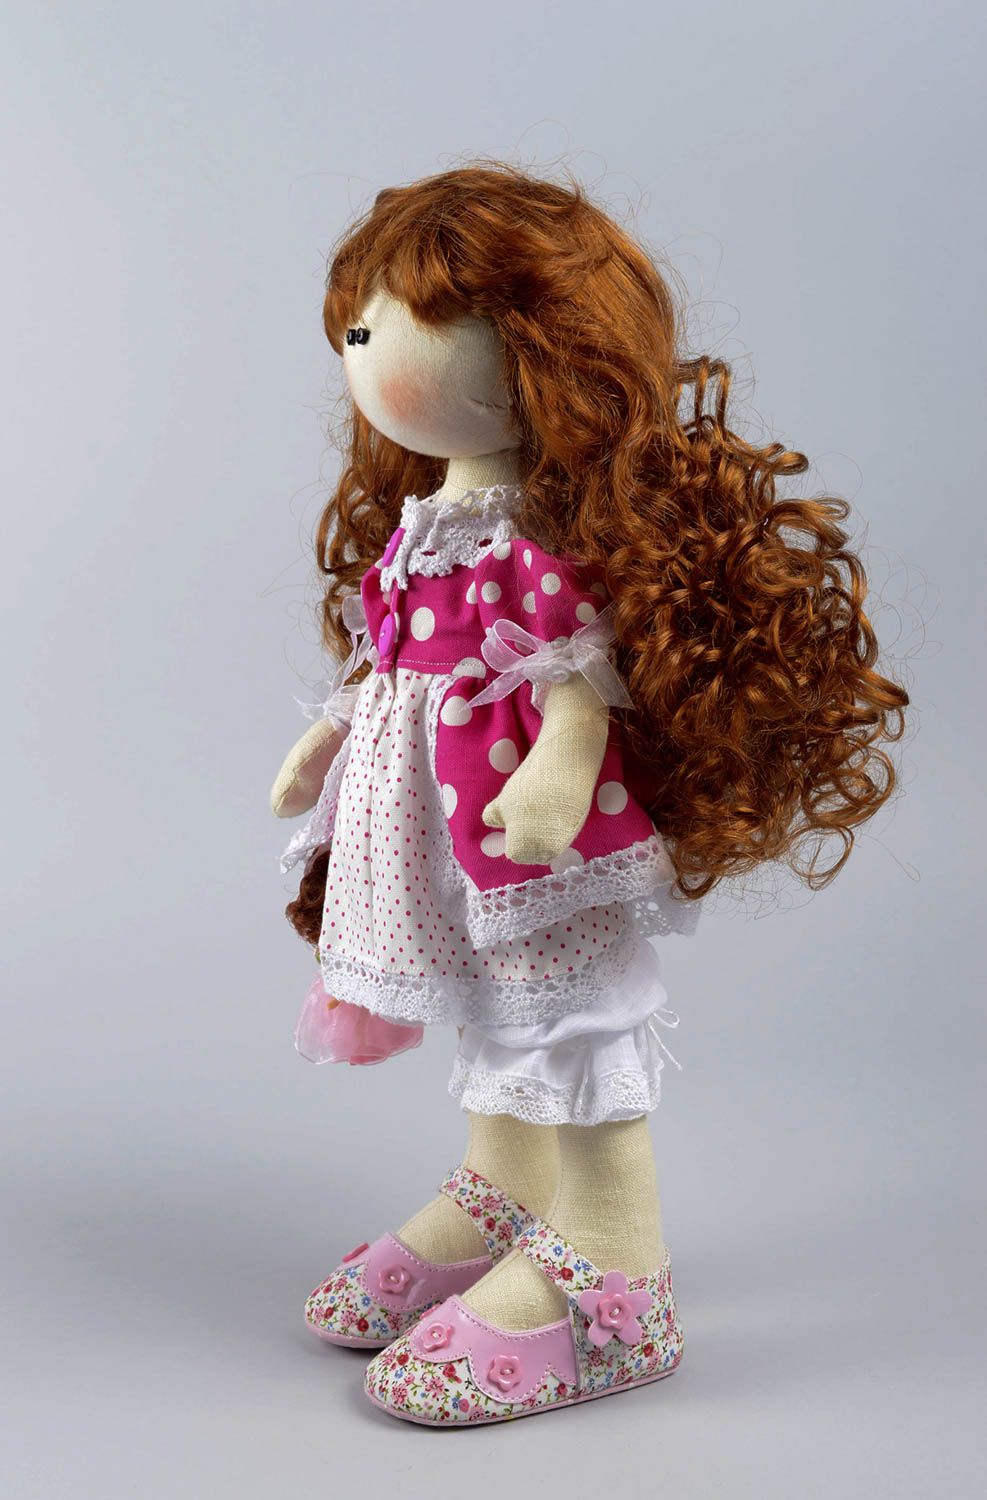 Beautiful handmade rag doll unusual soft toy stuffed toy for girls small gifts photo 3